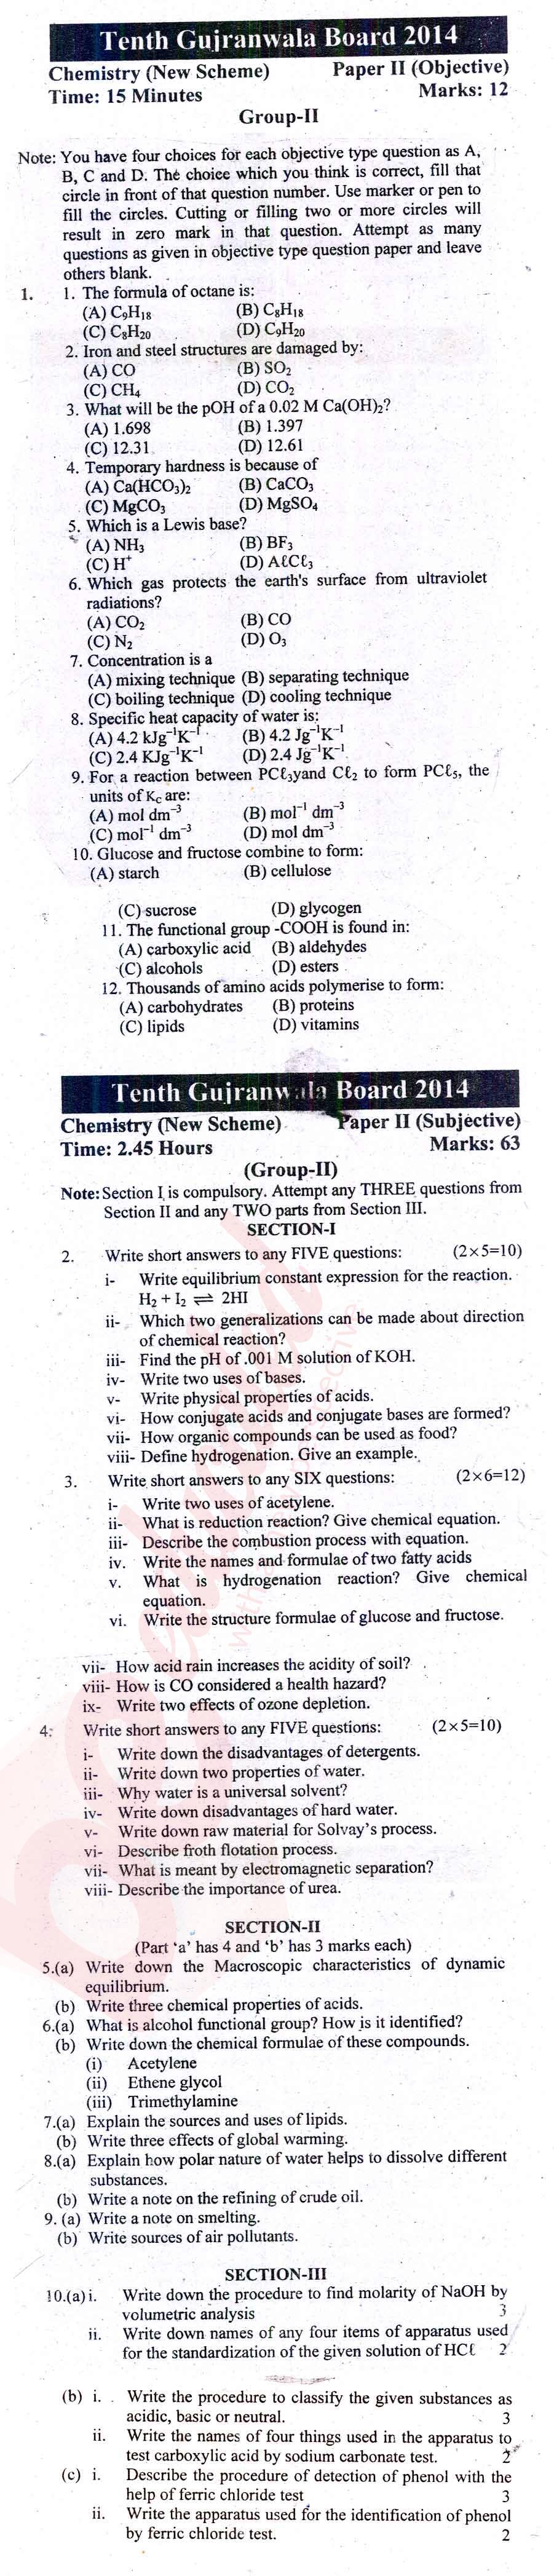 Chemistry 10th English Medium Past Paper Group 2 BISE Gujranwala 2014